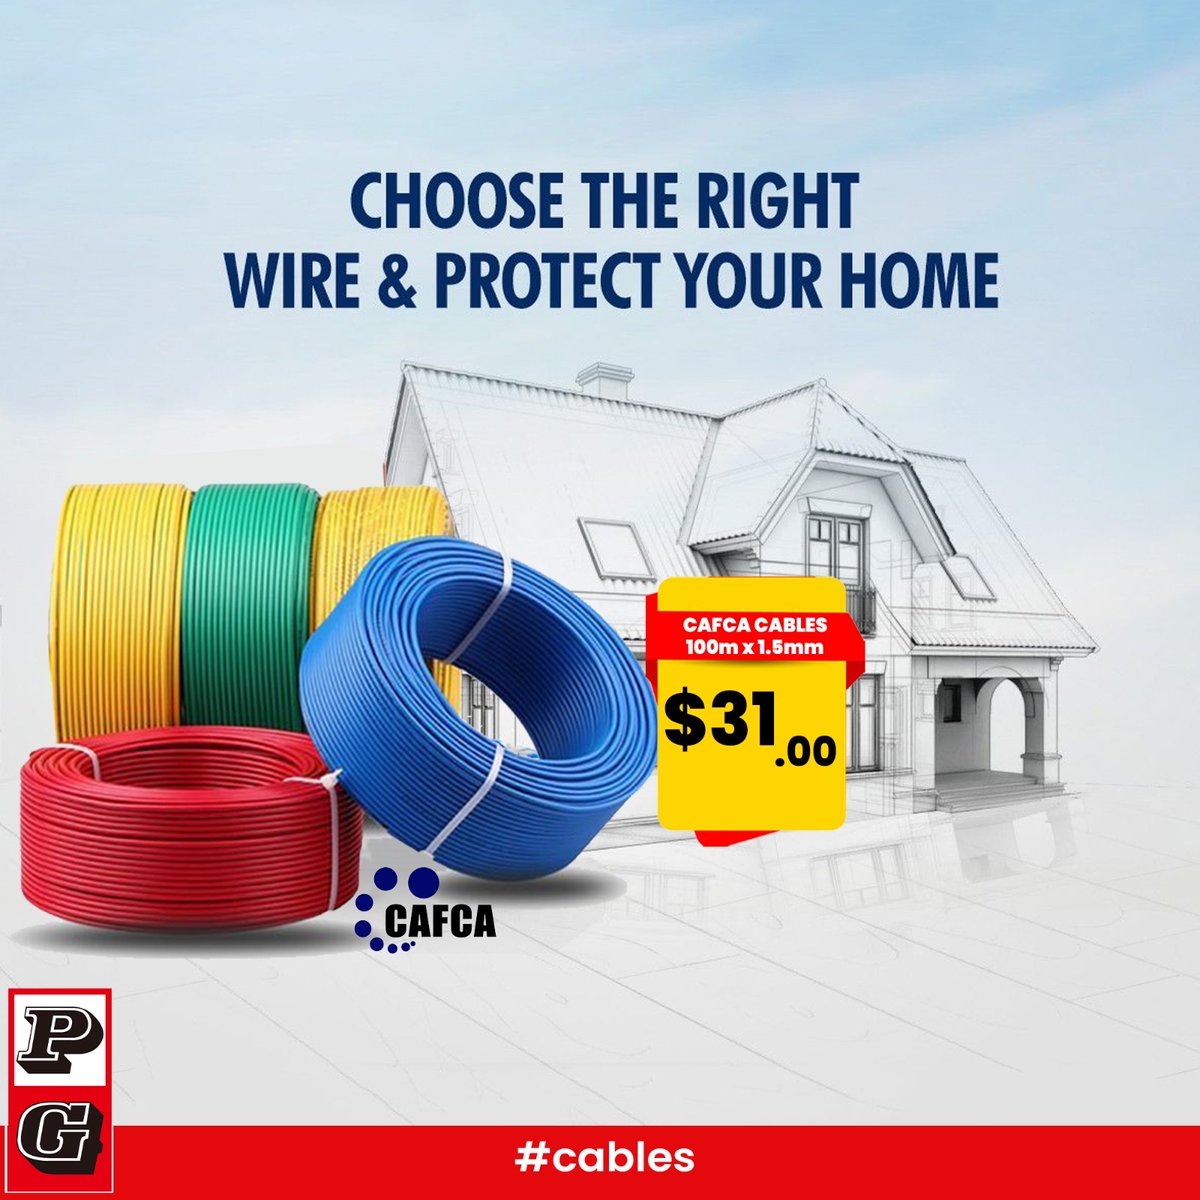 Power up your home with Cafca electric cables from PG Centre. #poweryourhome #TrustedForGenerations #pgcentre